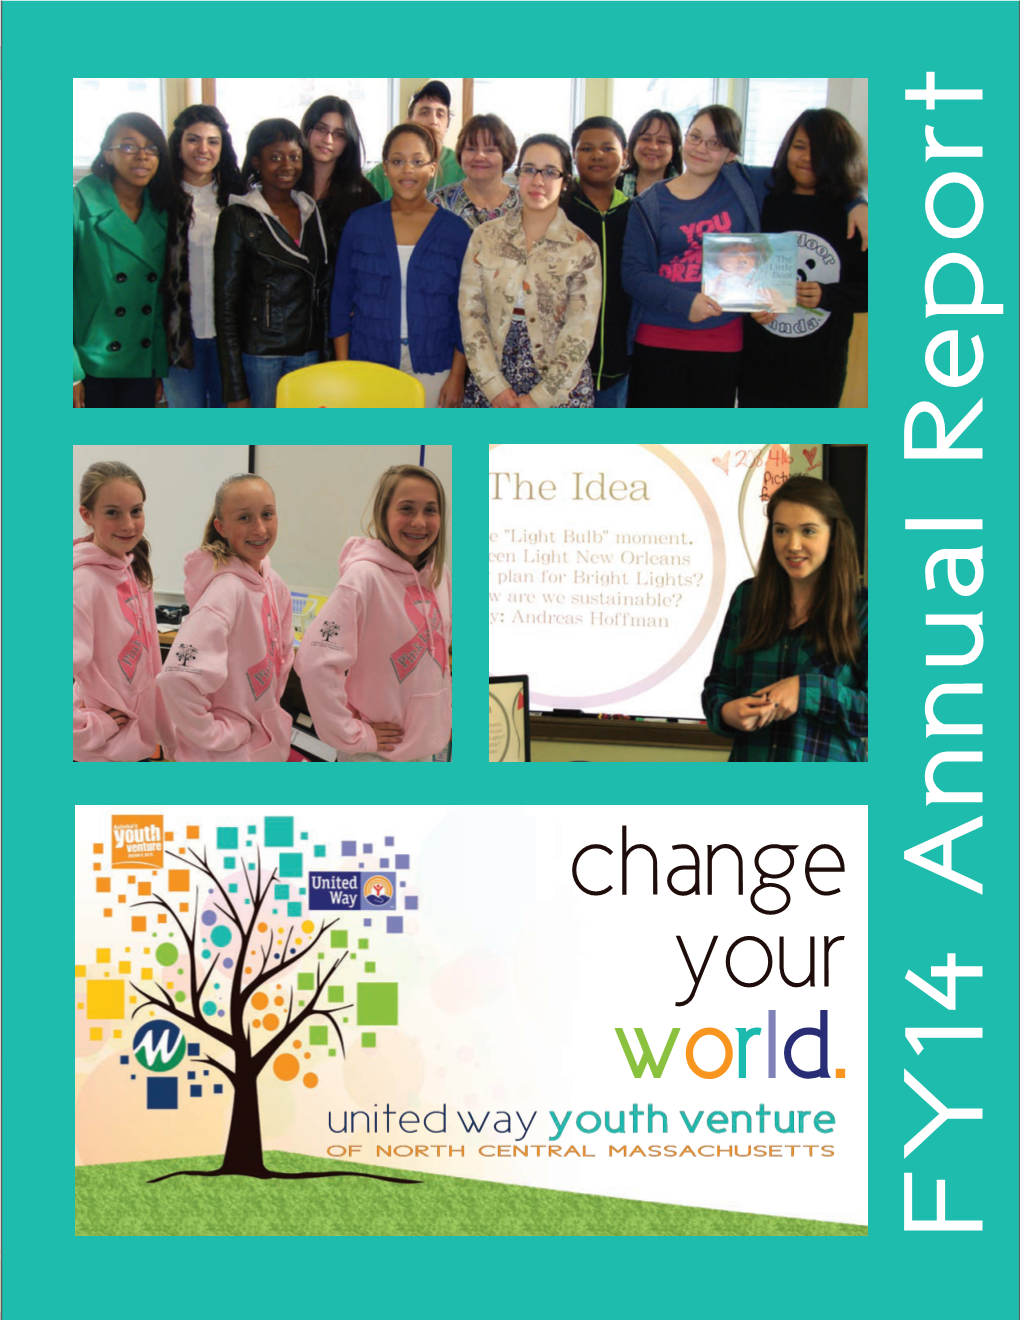 Change Your World. FY14 Annual Report 1 “Young People Should Be at the Forefront of Global Change and Innovation